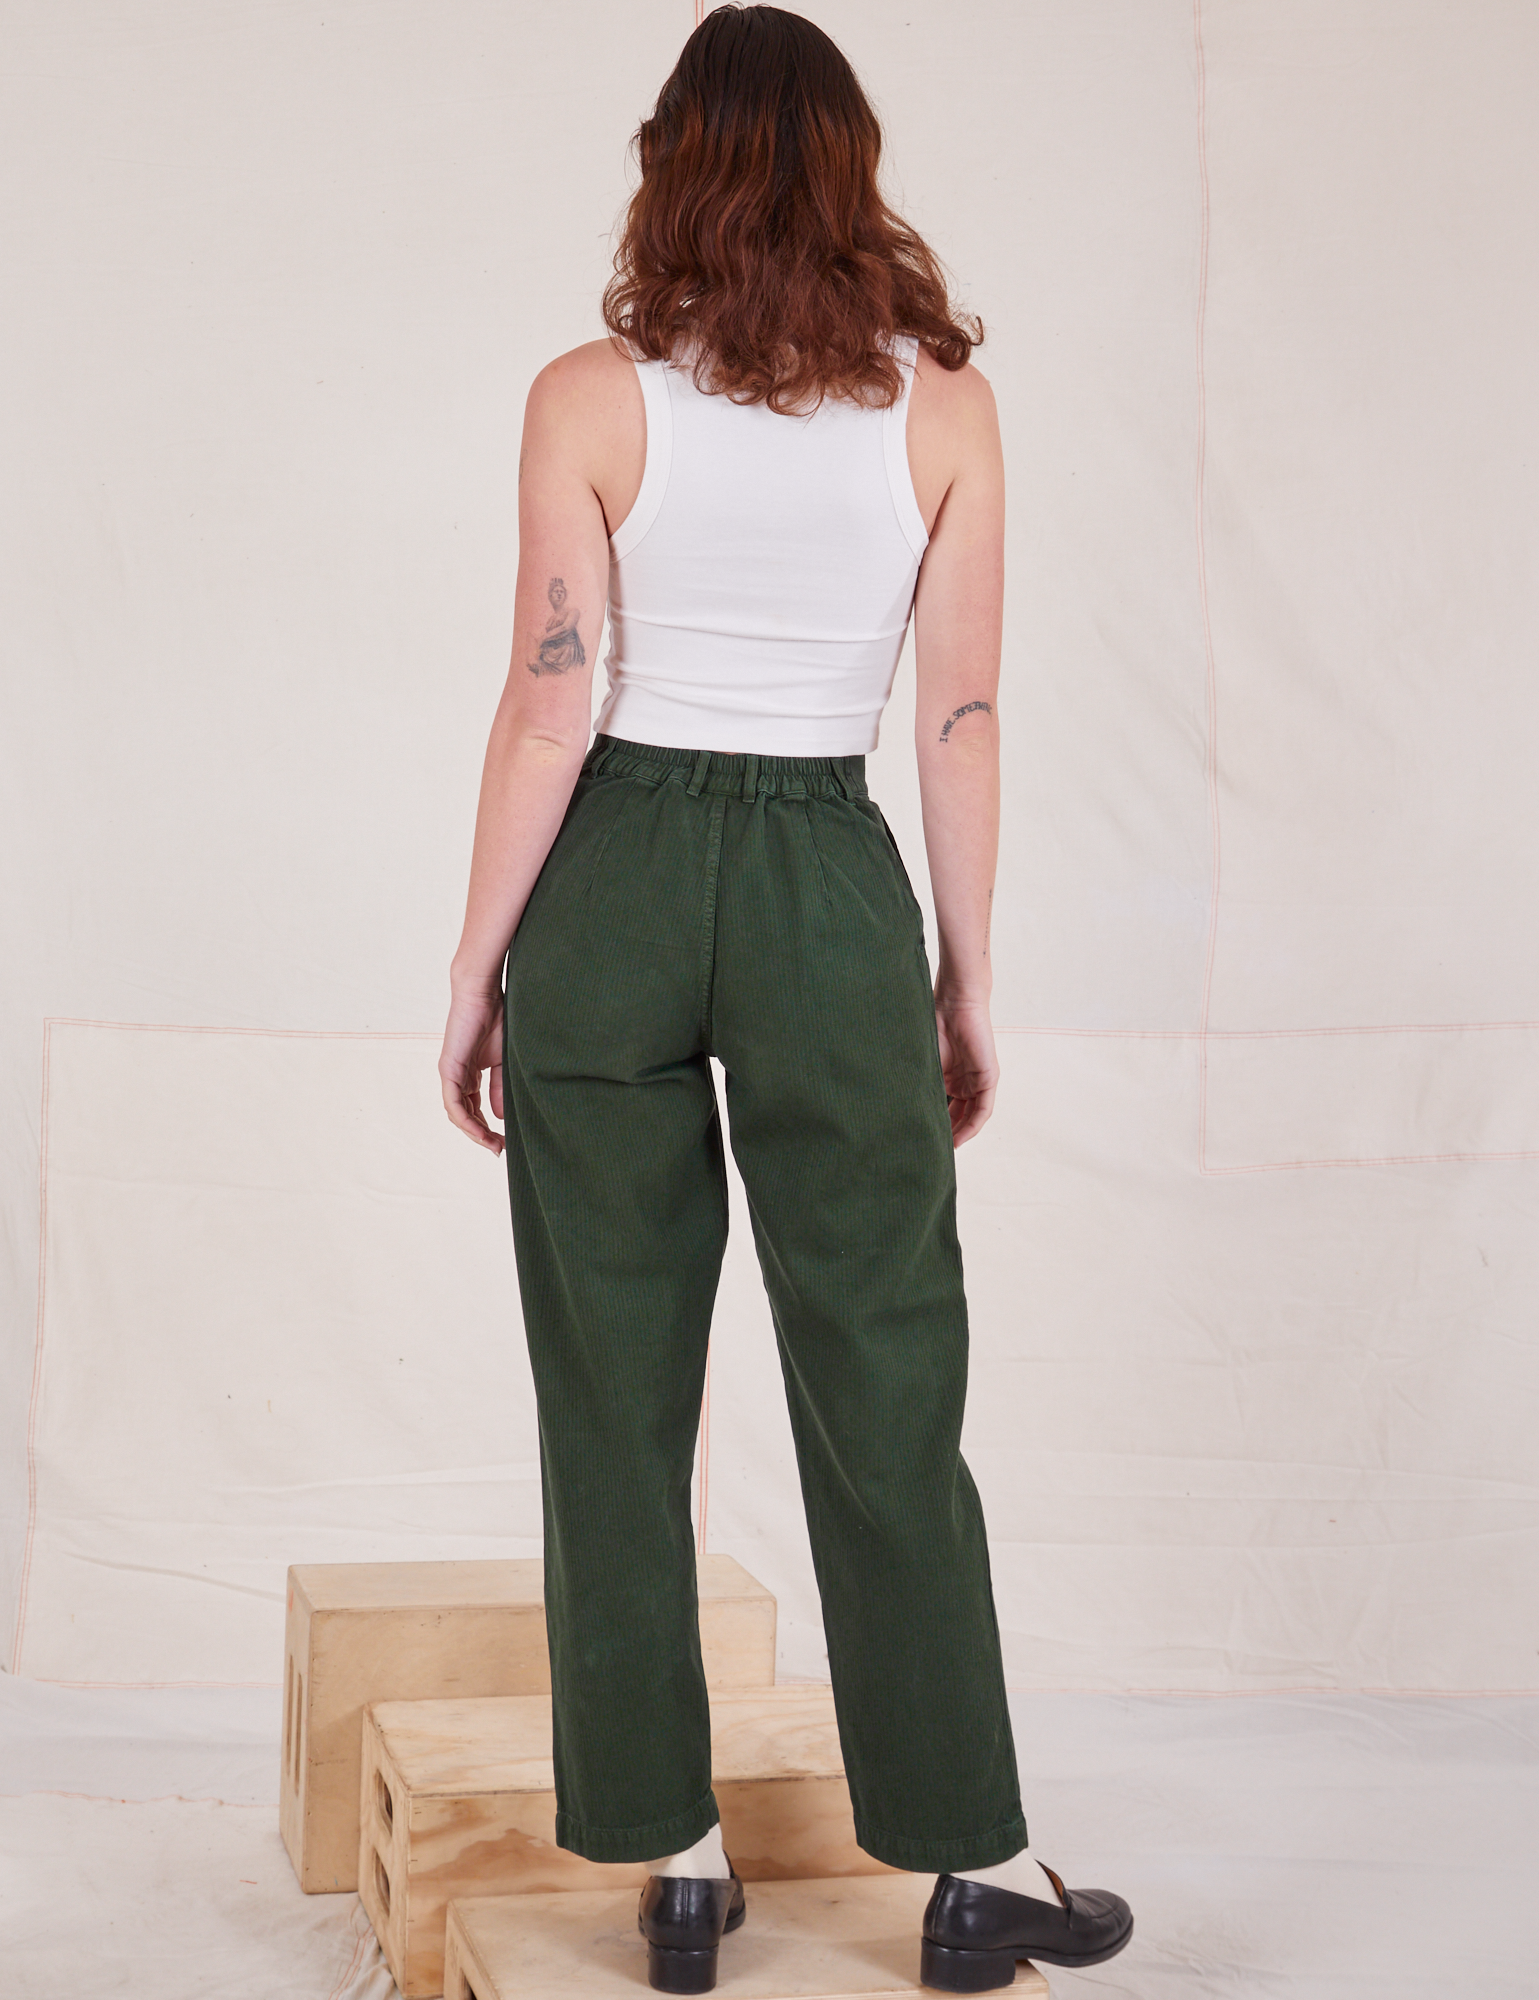 Back view of Heritage Trousers in Swamp Green and vintage off-white Cropped Tank Top on Alex